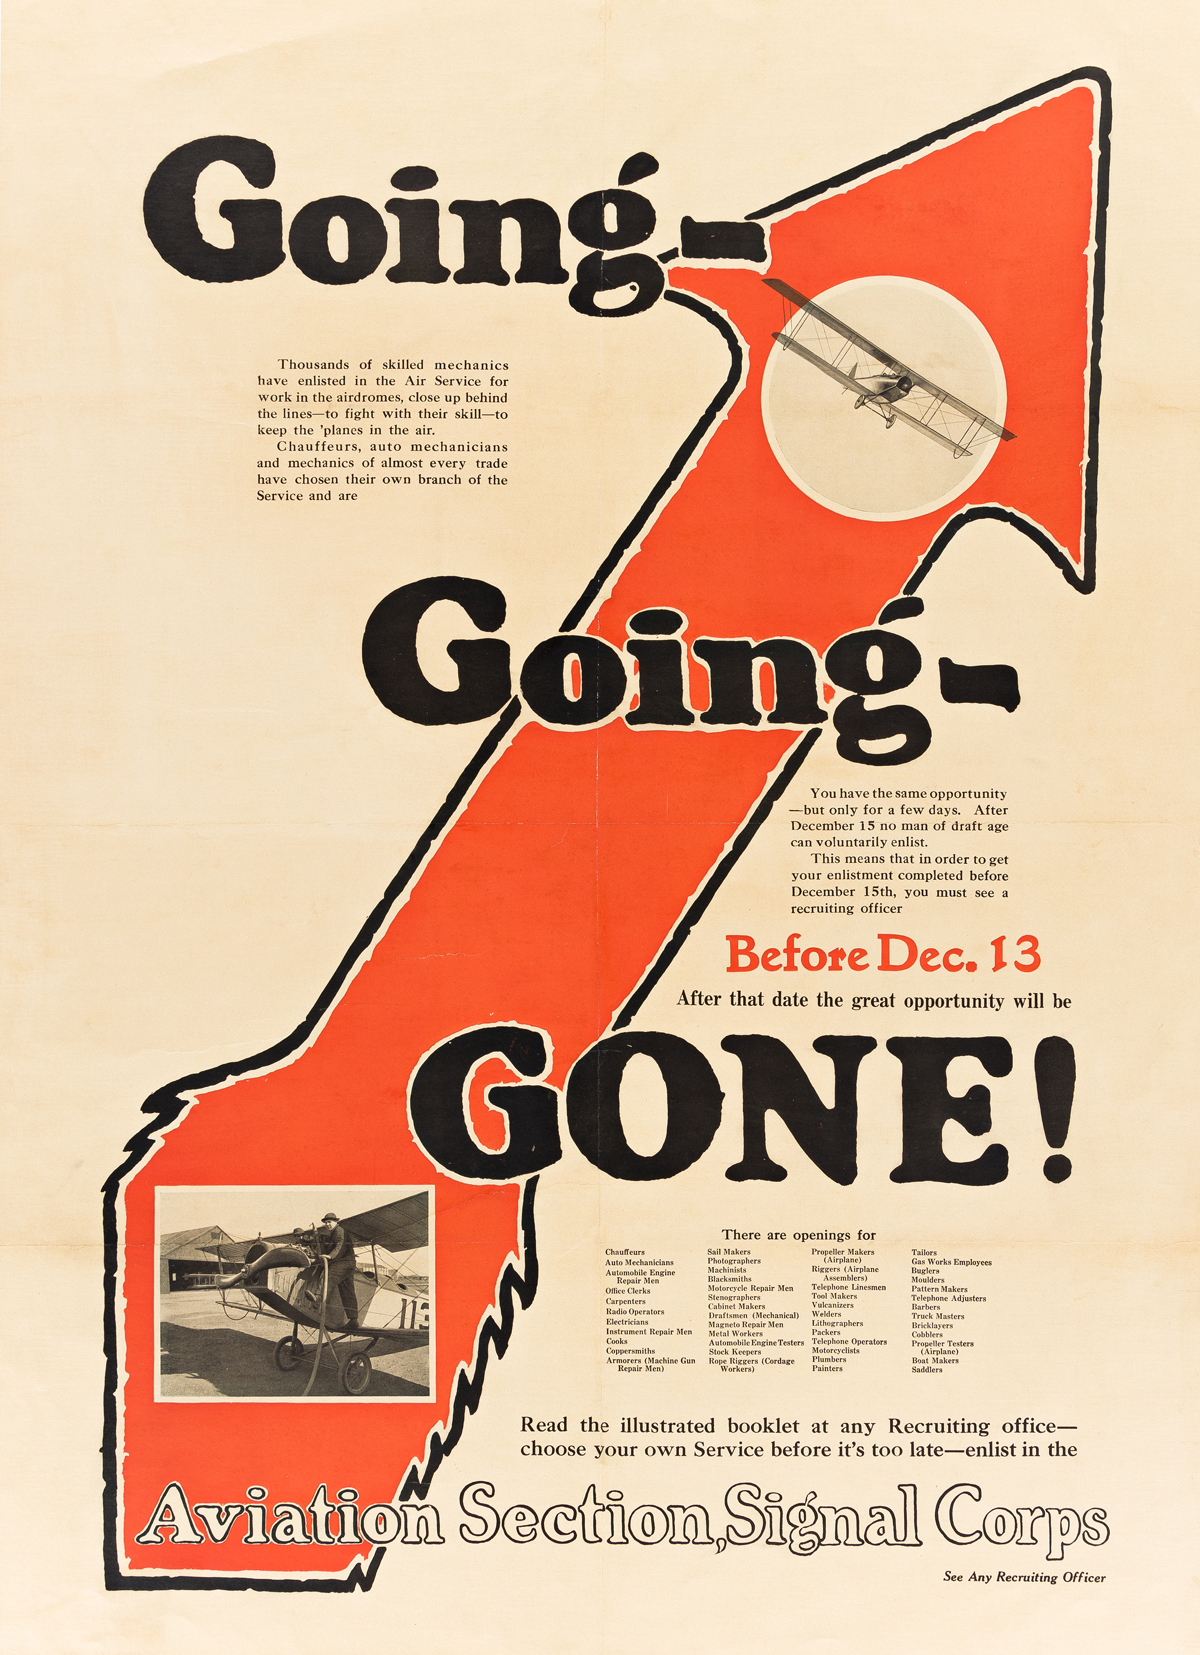 DESIGNER UNKNOWN.  GOING - GOING - GONE! / AVIATION SECTION, SIGNAL CORPS. Circa 1917. 42¼x30½ inches, 107¼x77½ cm.